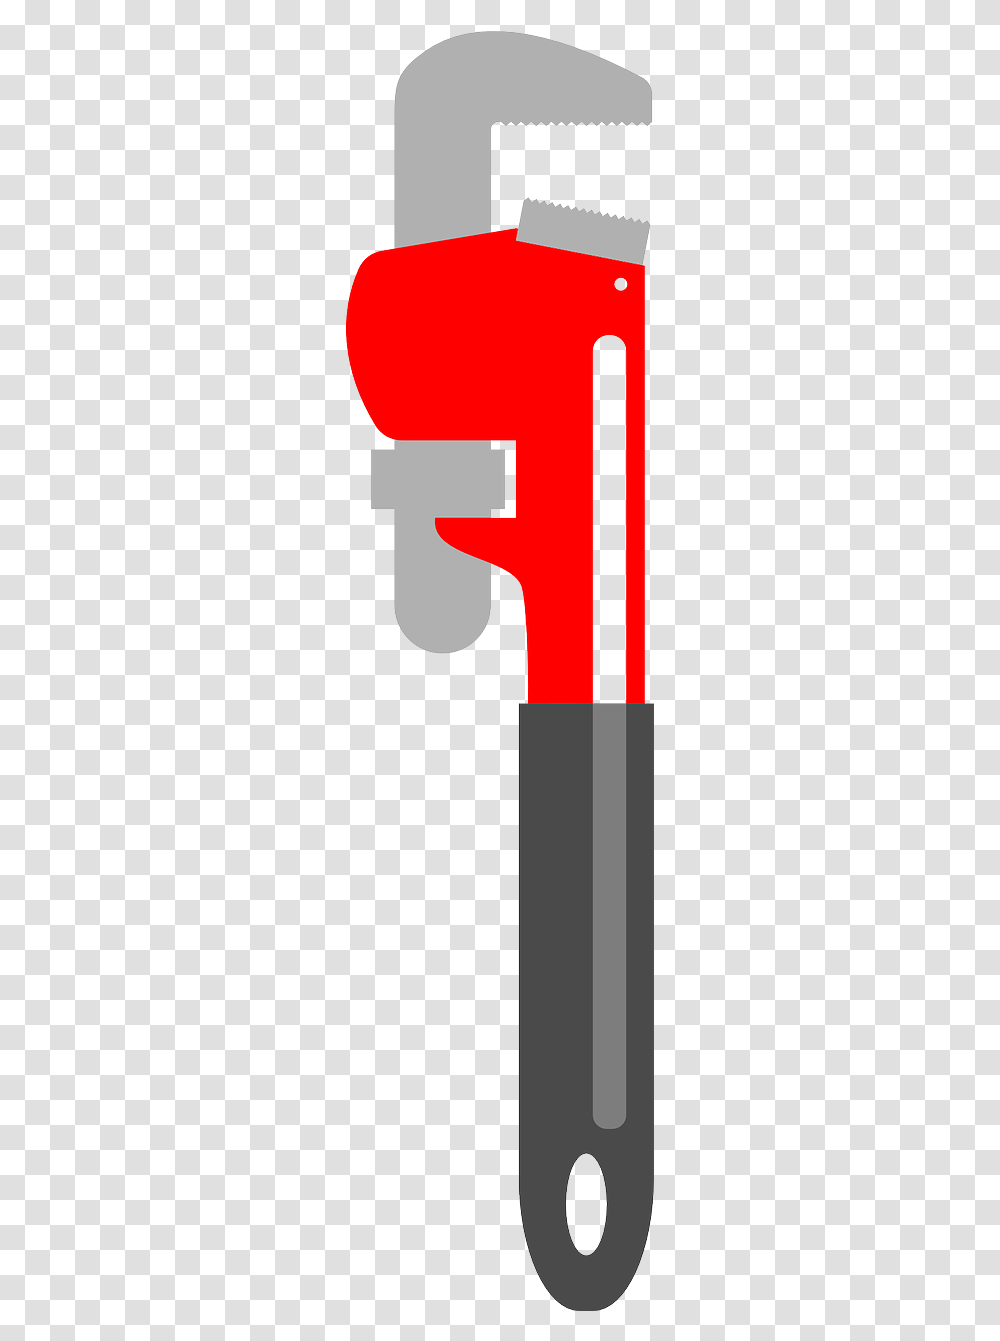 Pipe Wrench Pipe Tongs Image Pipe Wrench, Number, Blow Dryer Transparent Png